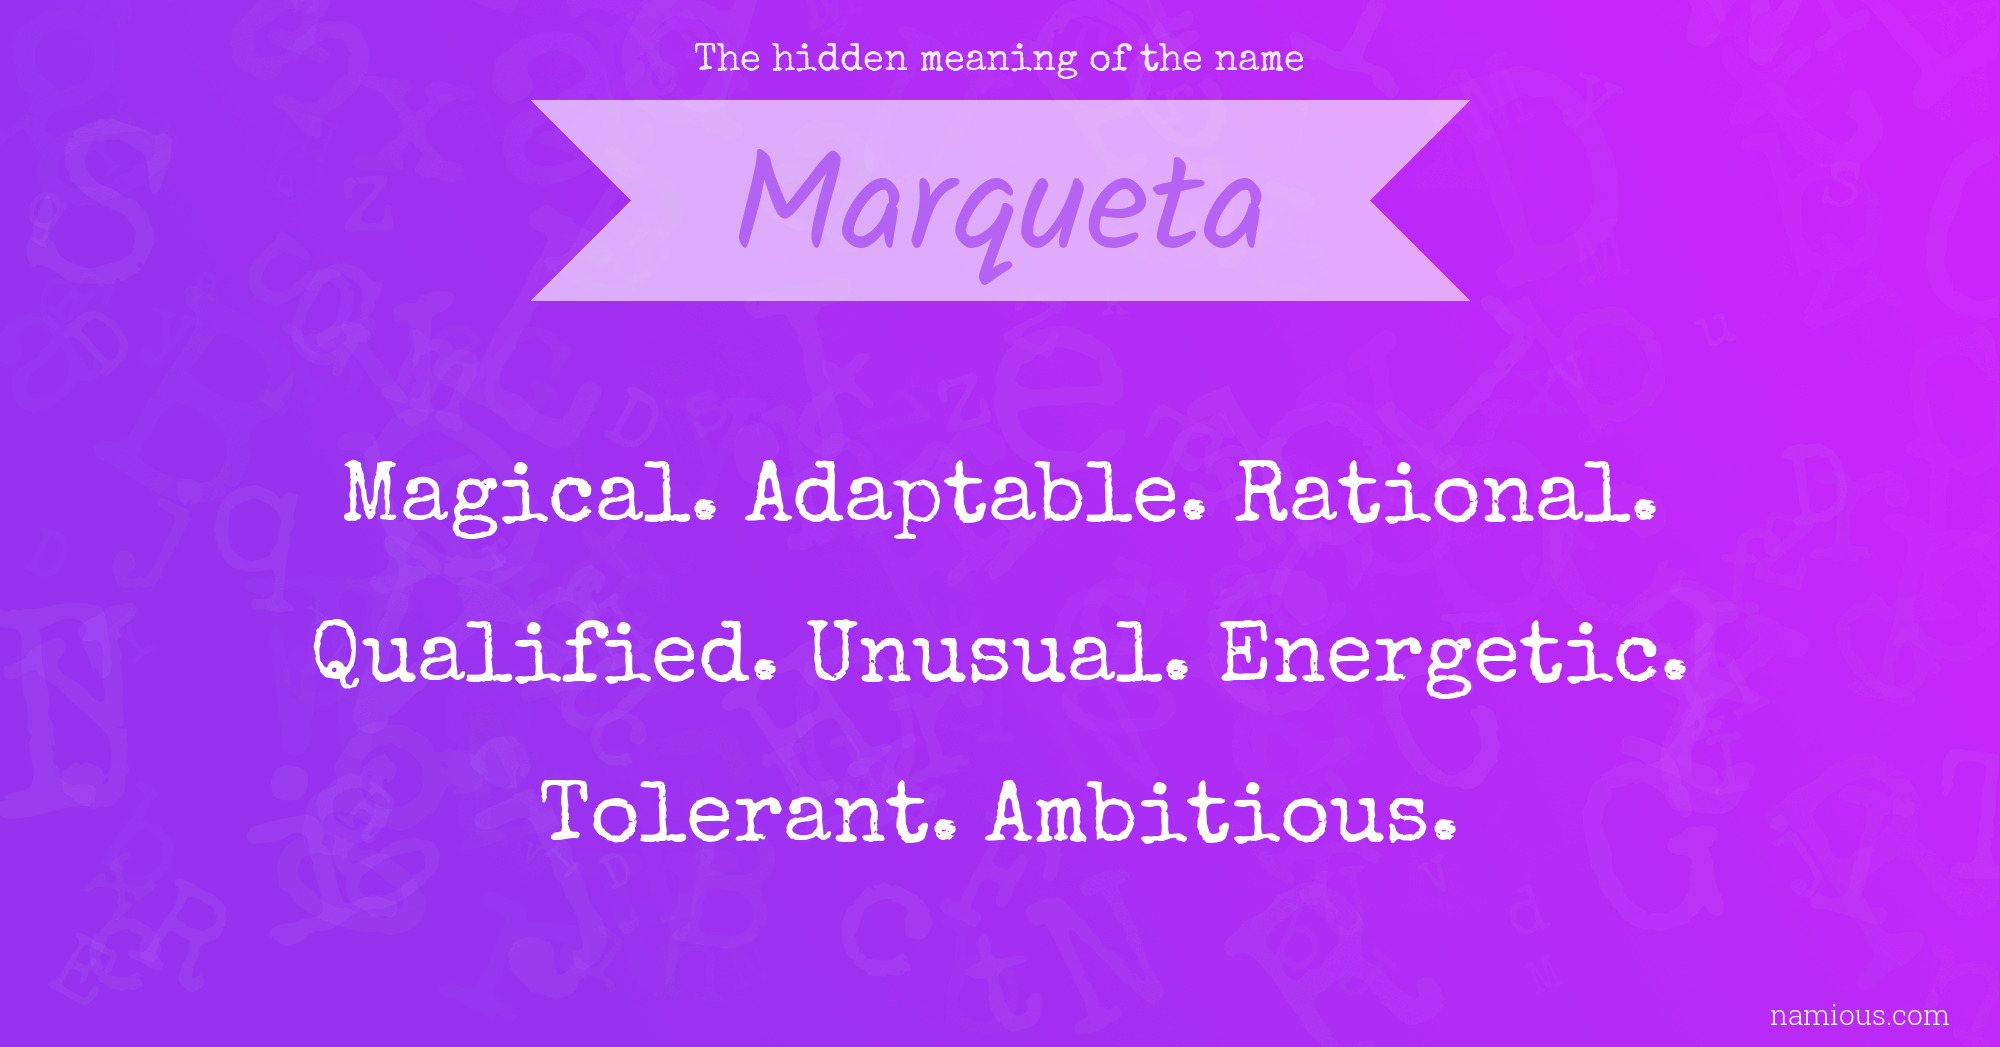 The hidden meaning of the name Marqueta